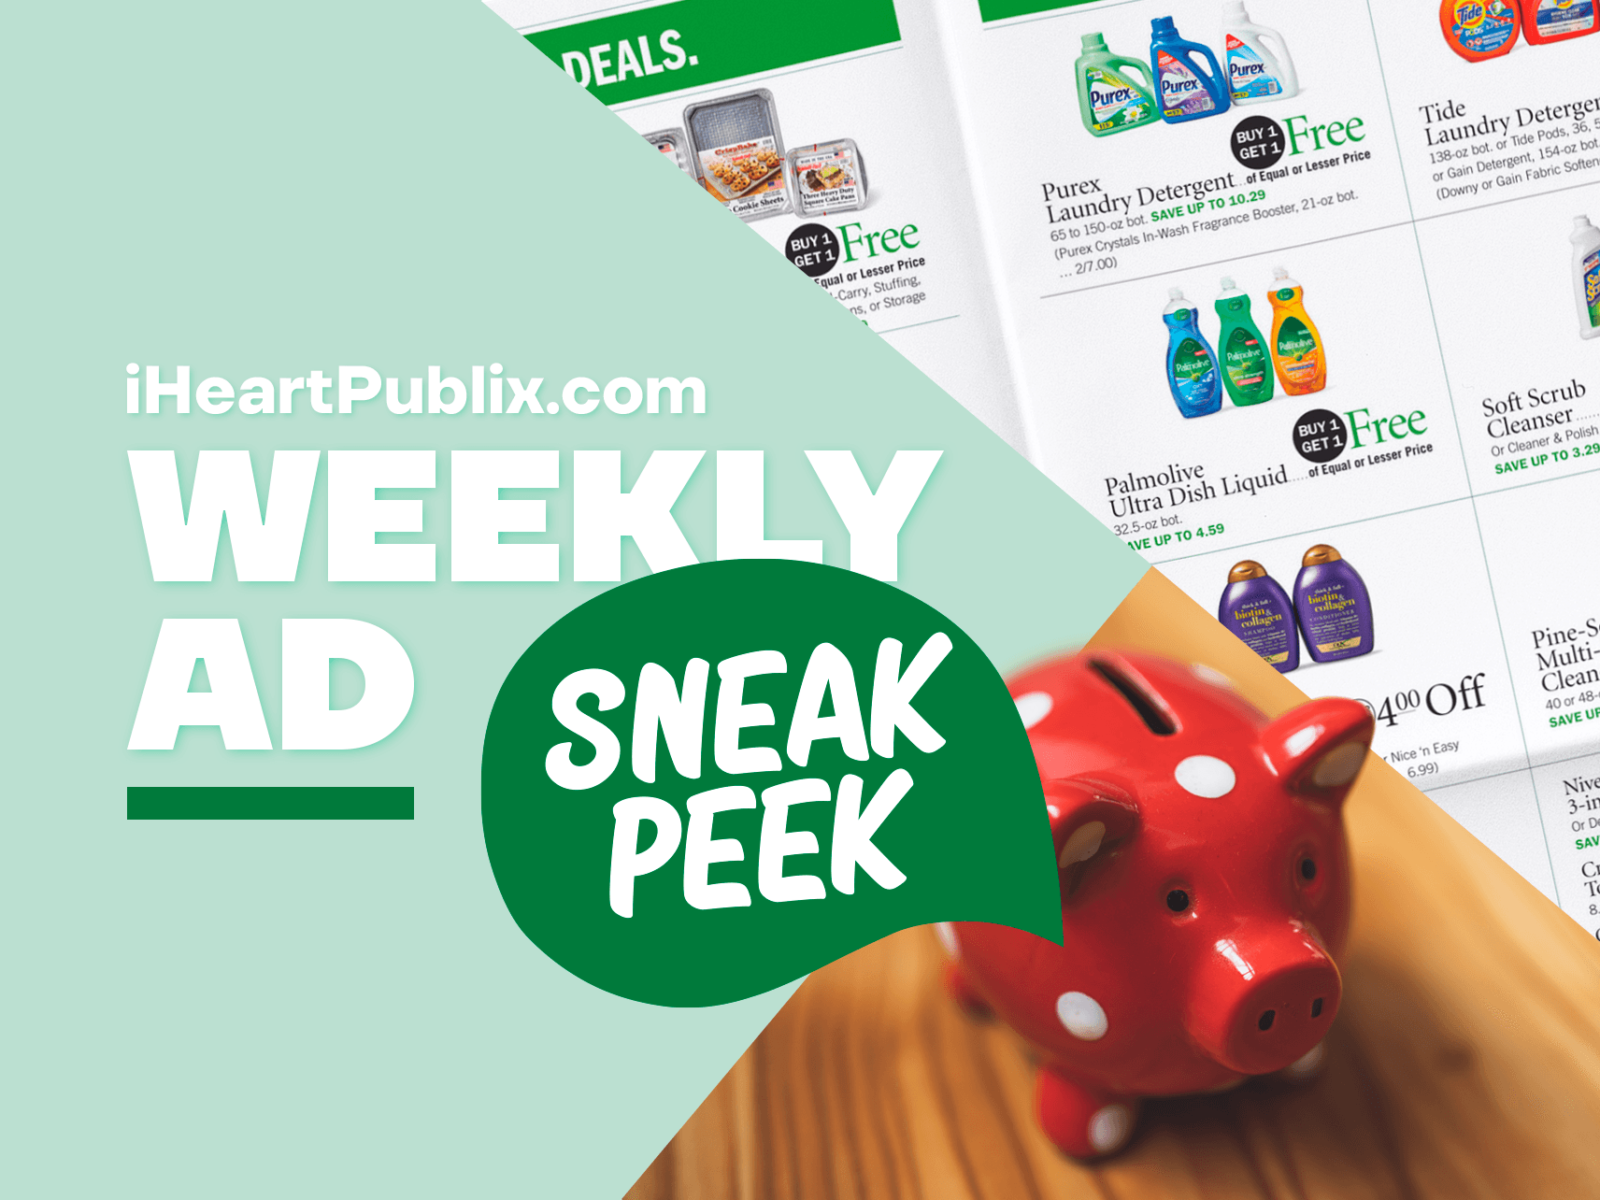 Publix Ad & Coupons Week Of 6/23 to 6/29 (6/22 to 6/28 For Some)